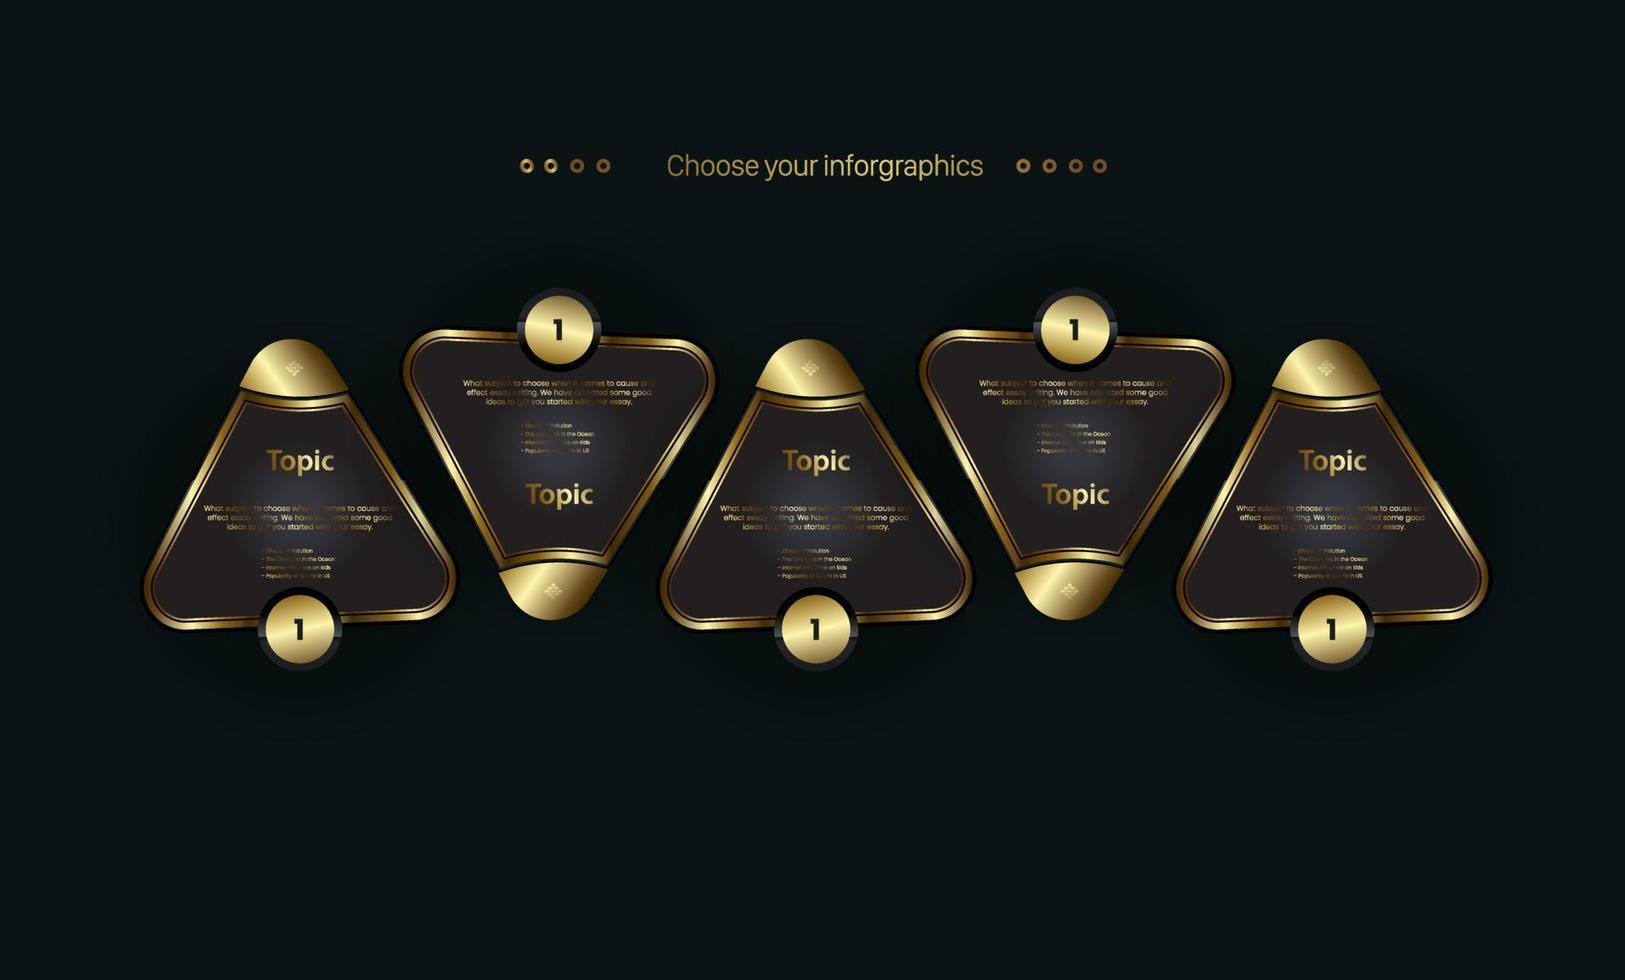 SET of luxury triangle buttons designs on dark background vector